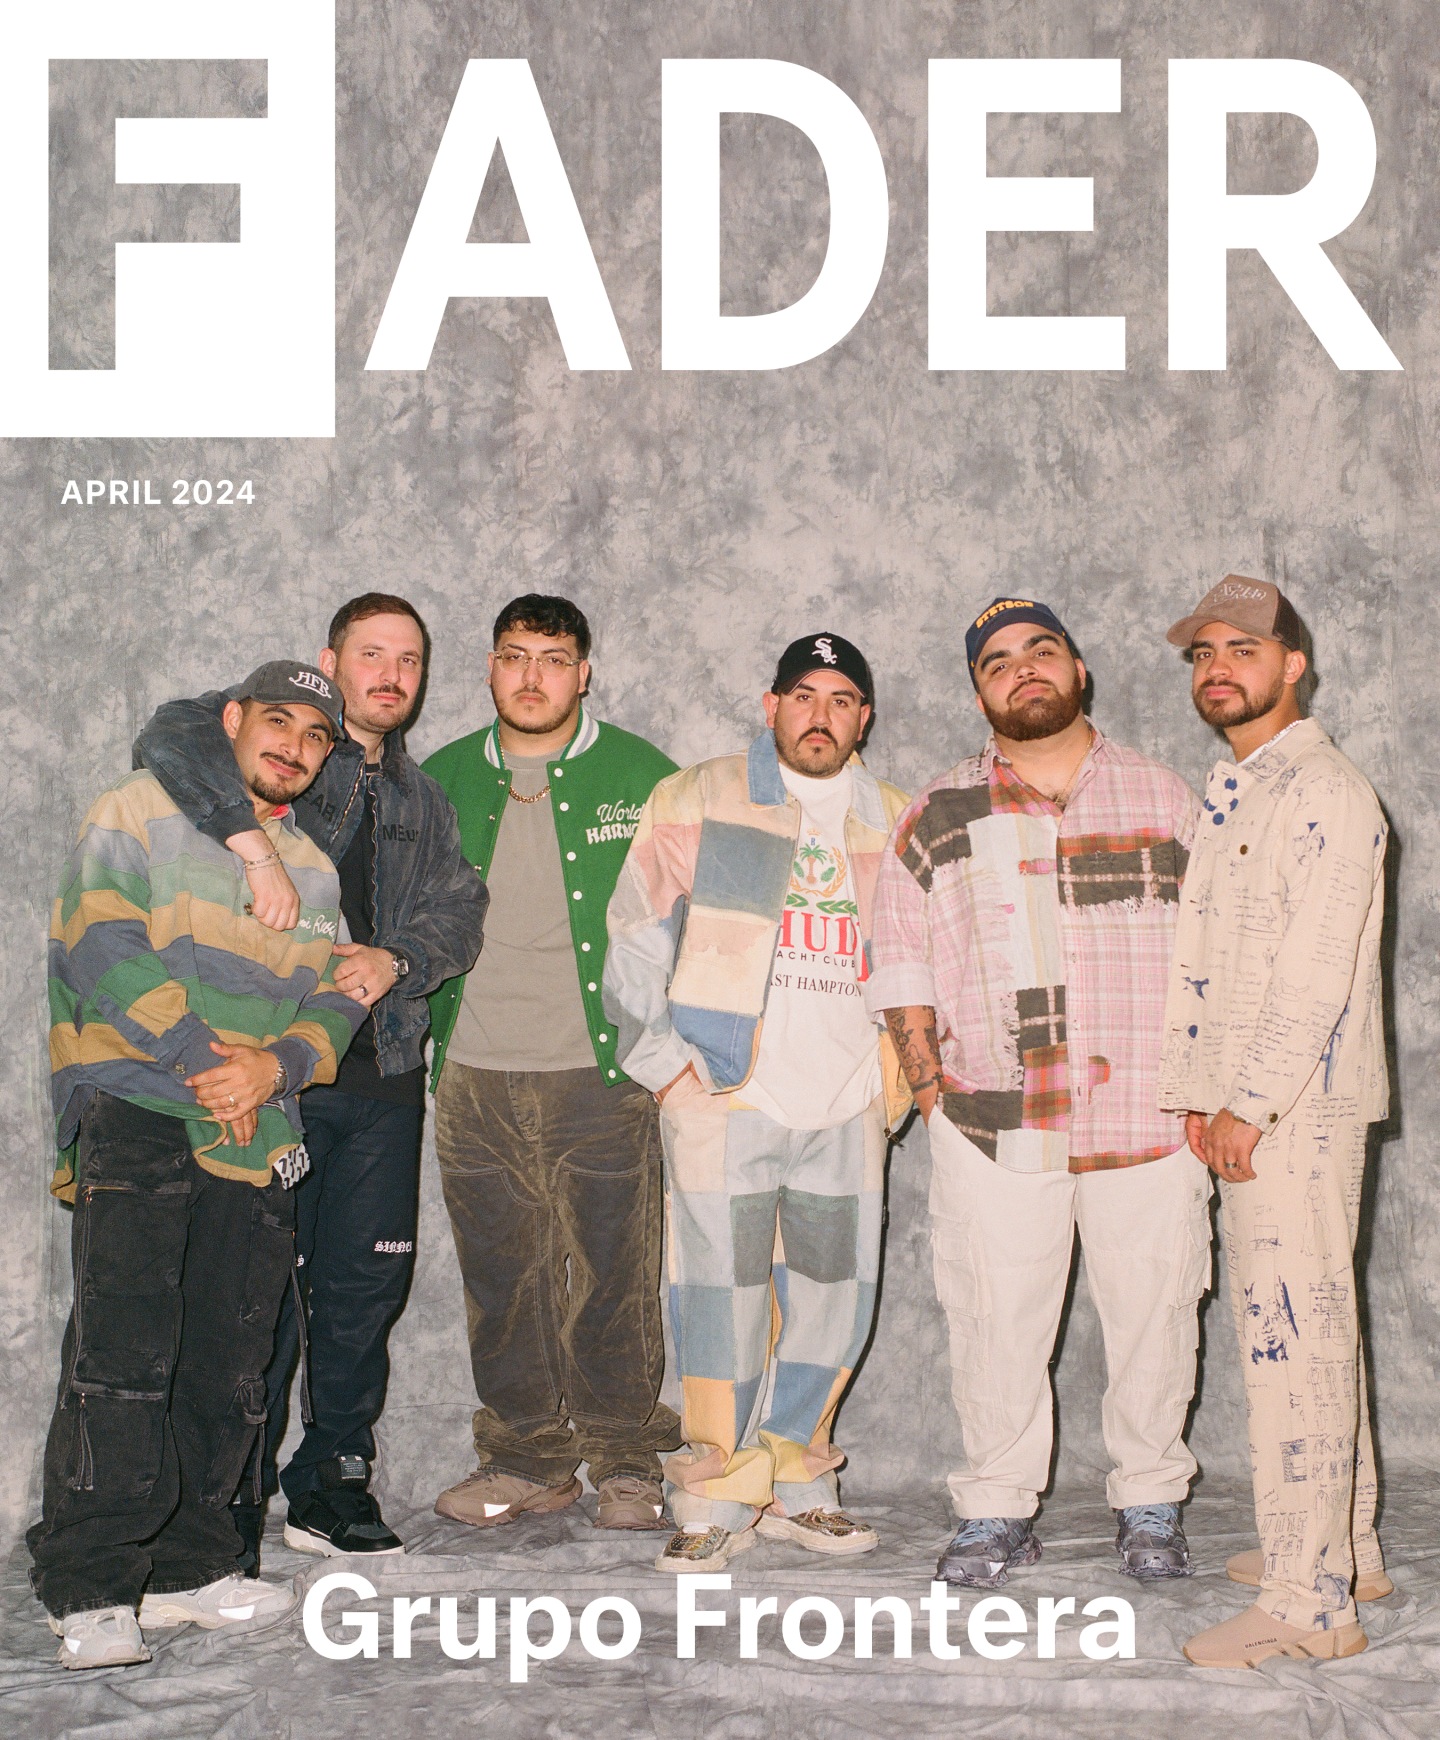 Cover Story: This is Grupo Frontera